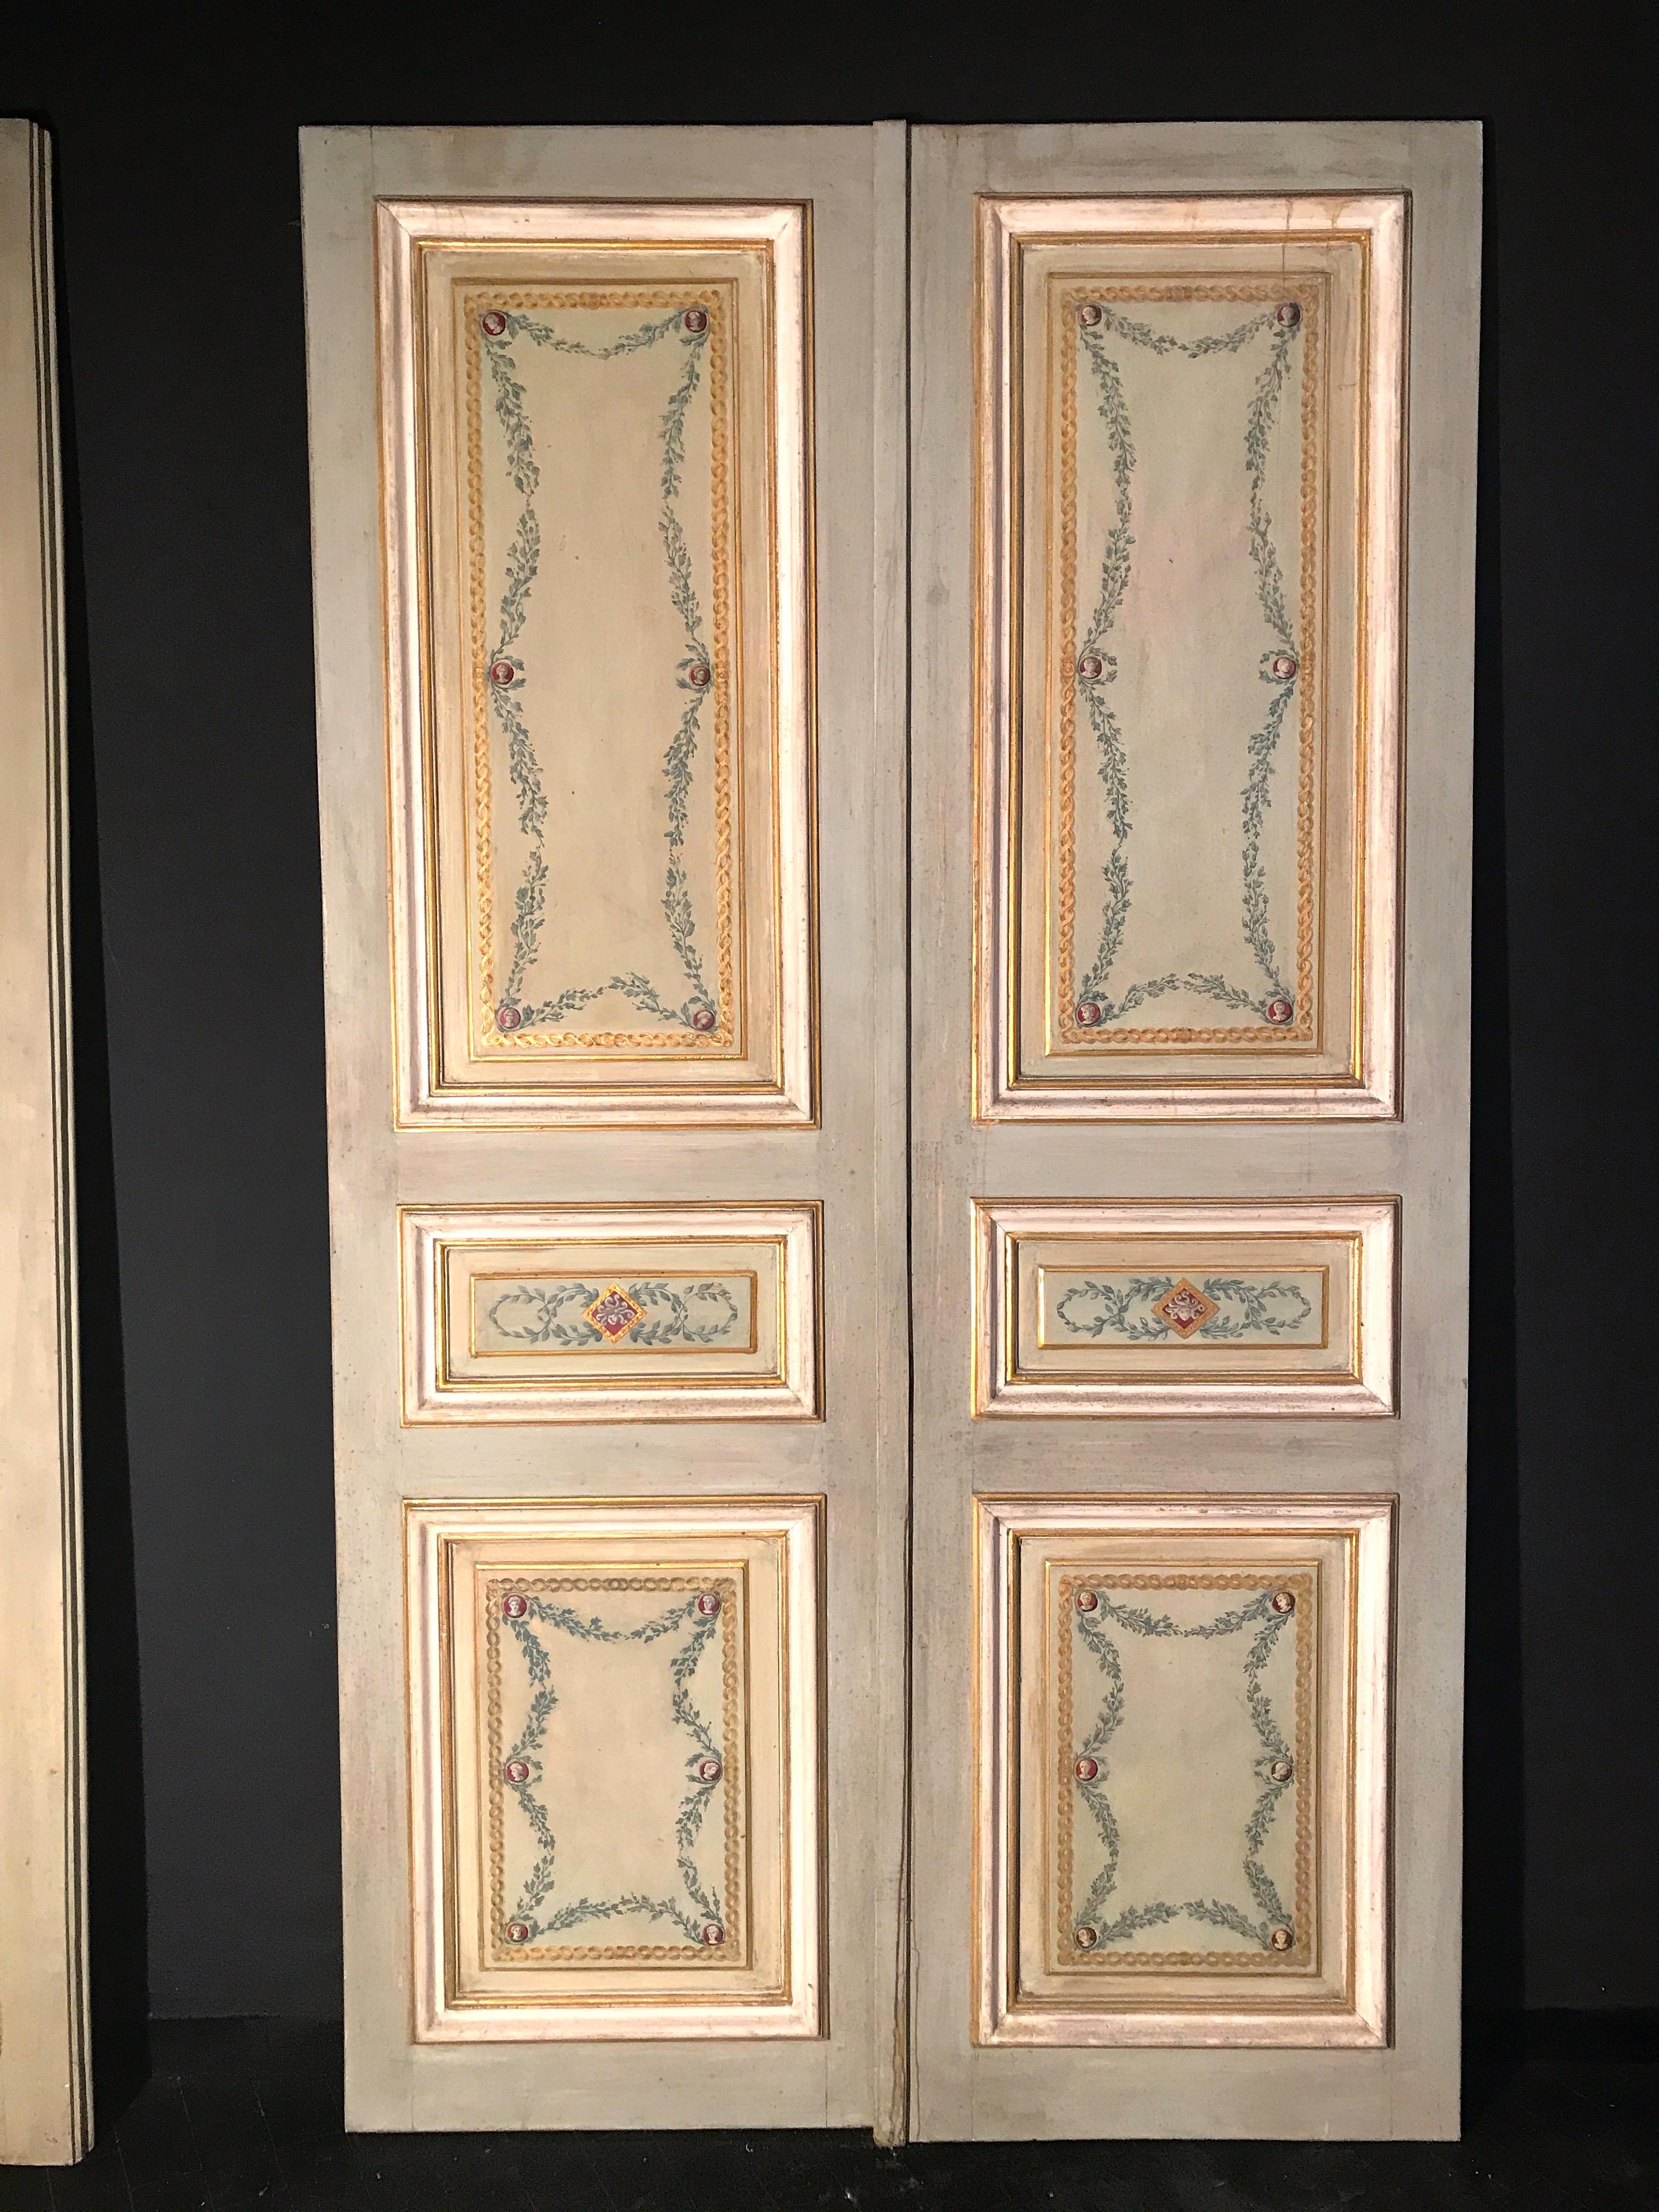 Elegant Italian finely paneled wooden doors, decoratively painted, from the mid-19th century. The doors feature a single front recessed panel painted with foliage and geometric designs in various shades of gray, light blue and ivory color centered